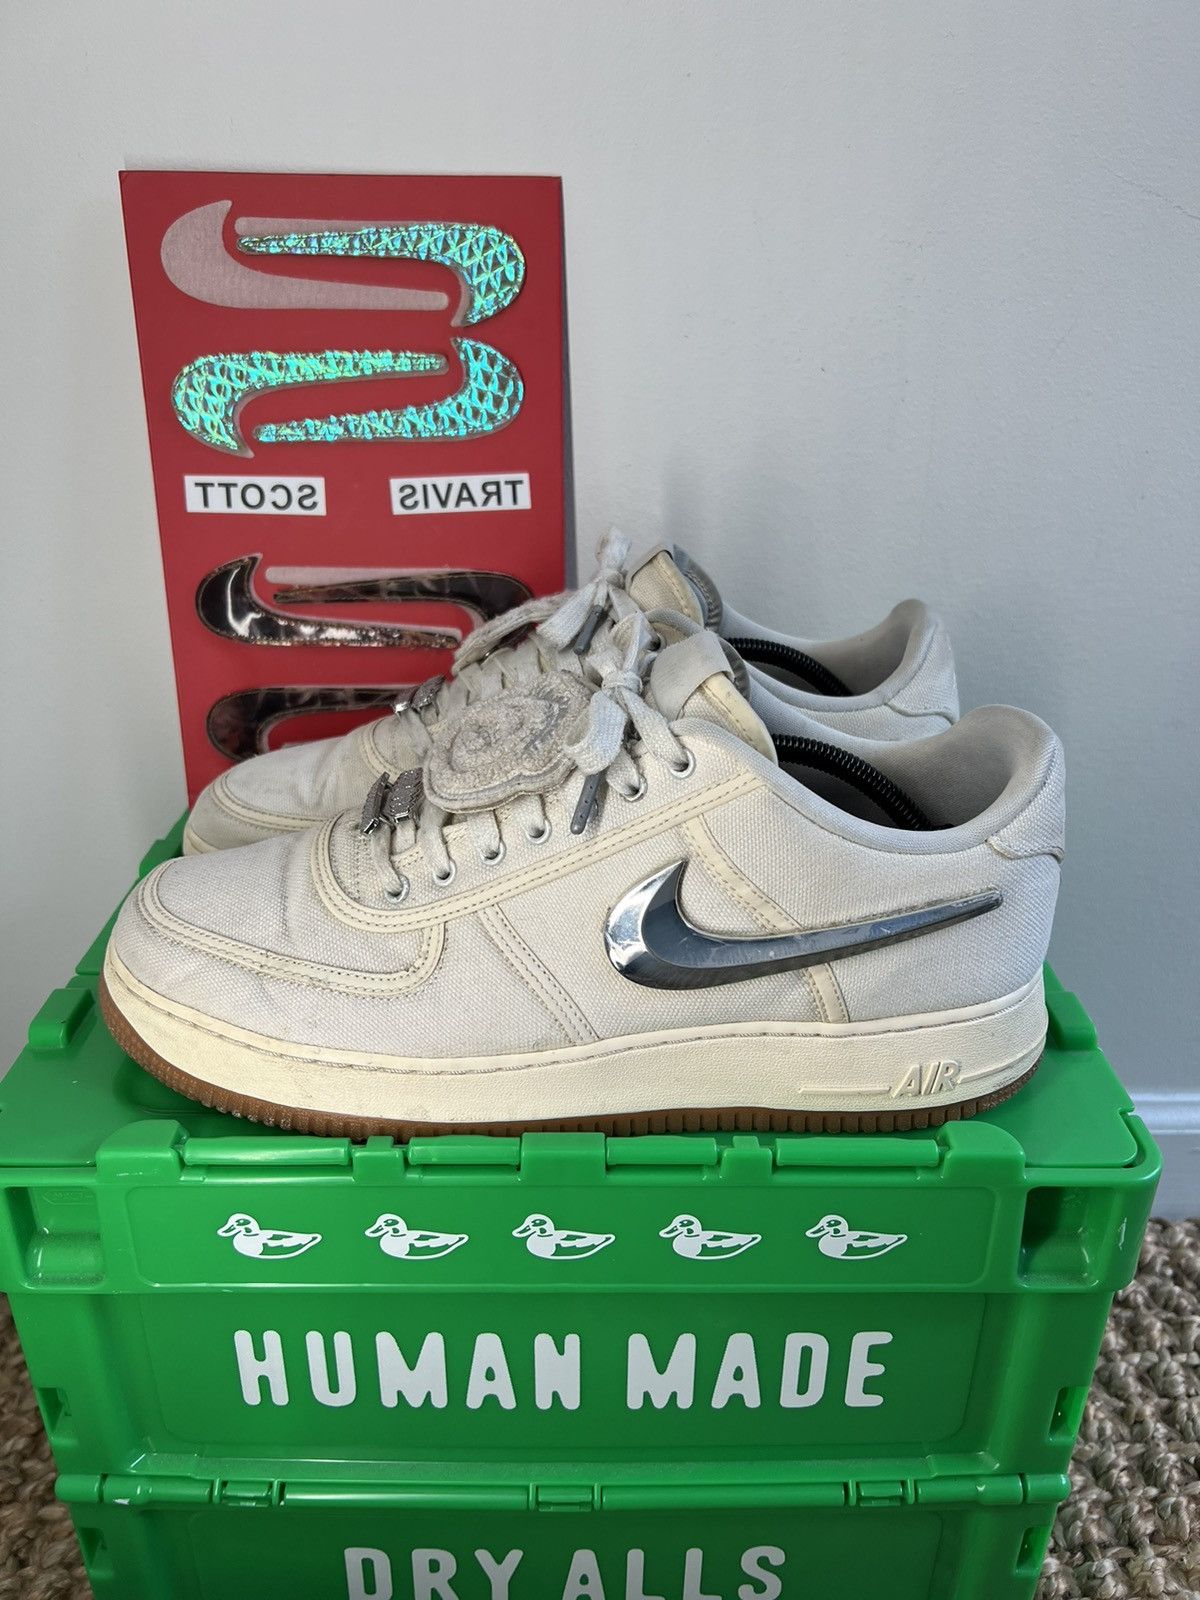 Pre-owned Nike X Travis Scott Air Force 1 Sail Size 11.5 Used Shoes